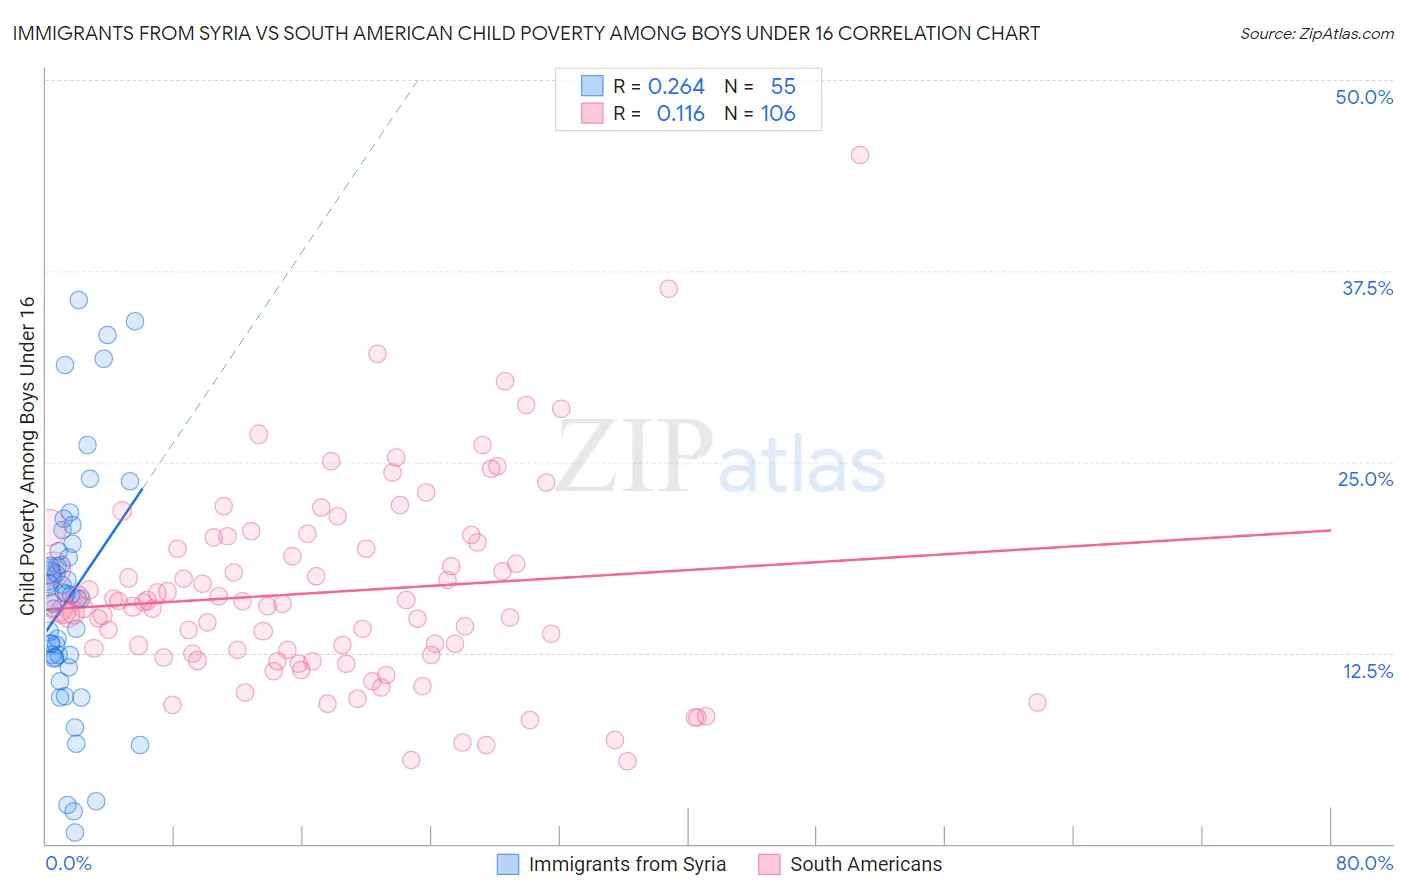 Immigrants from Syria vs South American Child Poverty Among Boys Under 16